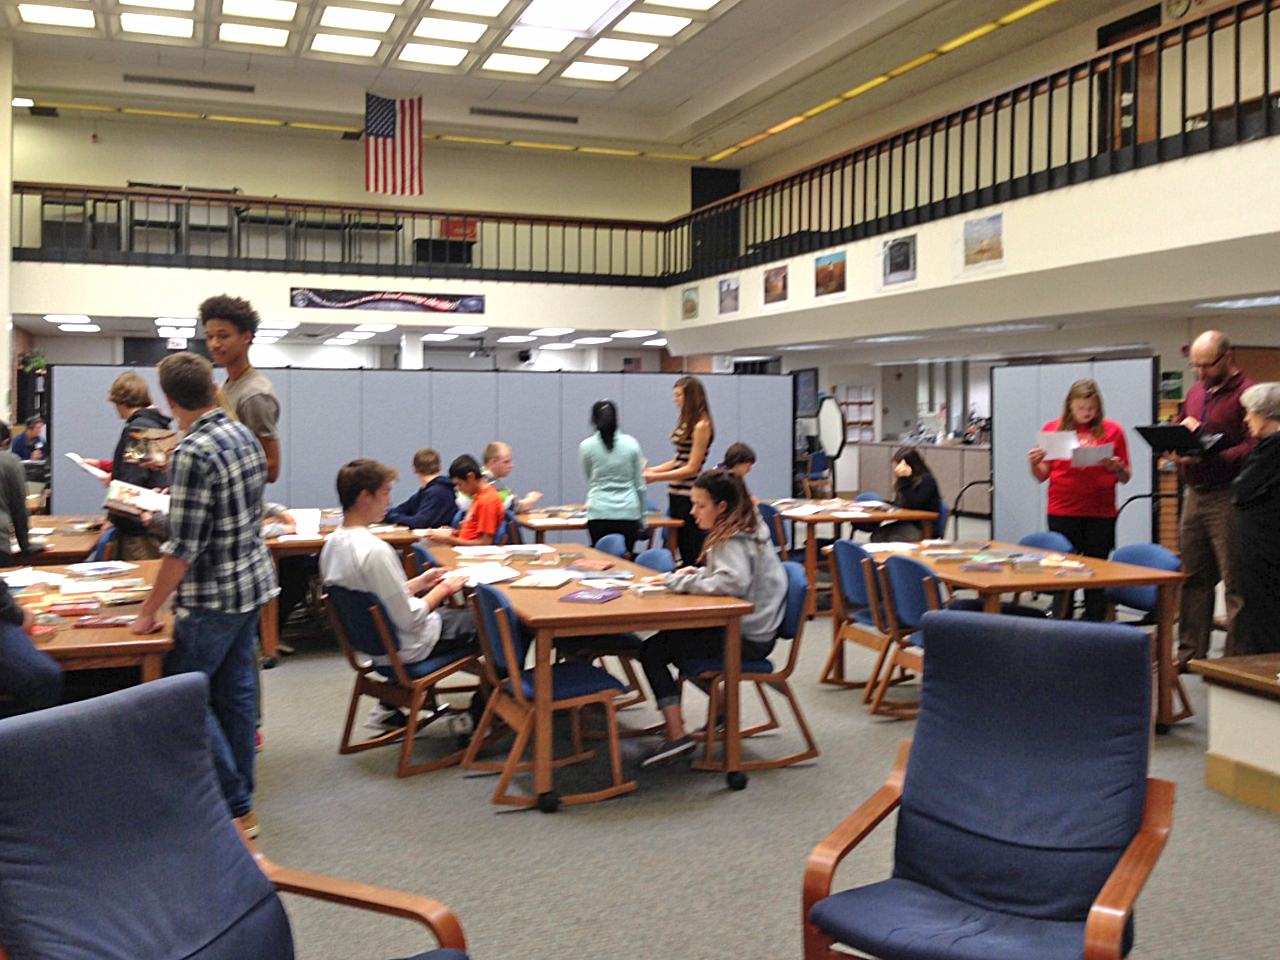 Students work on projects in a high school library classroom made with Screenflex Portable Room Dividers.